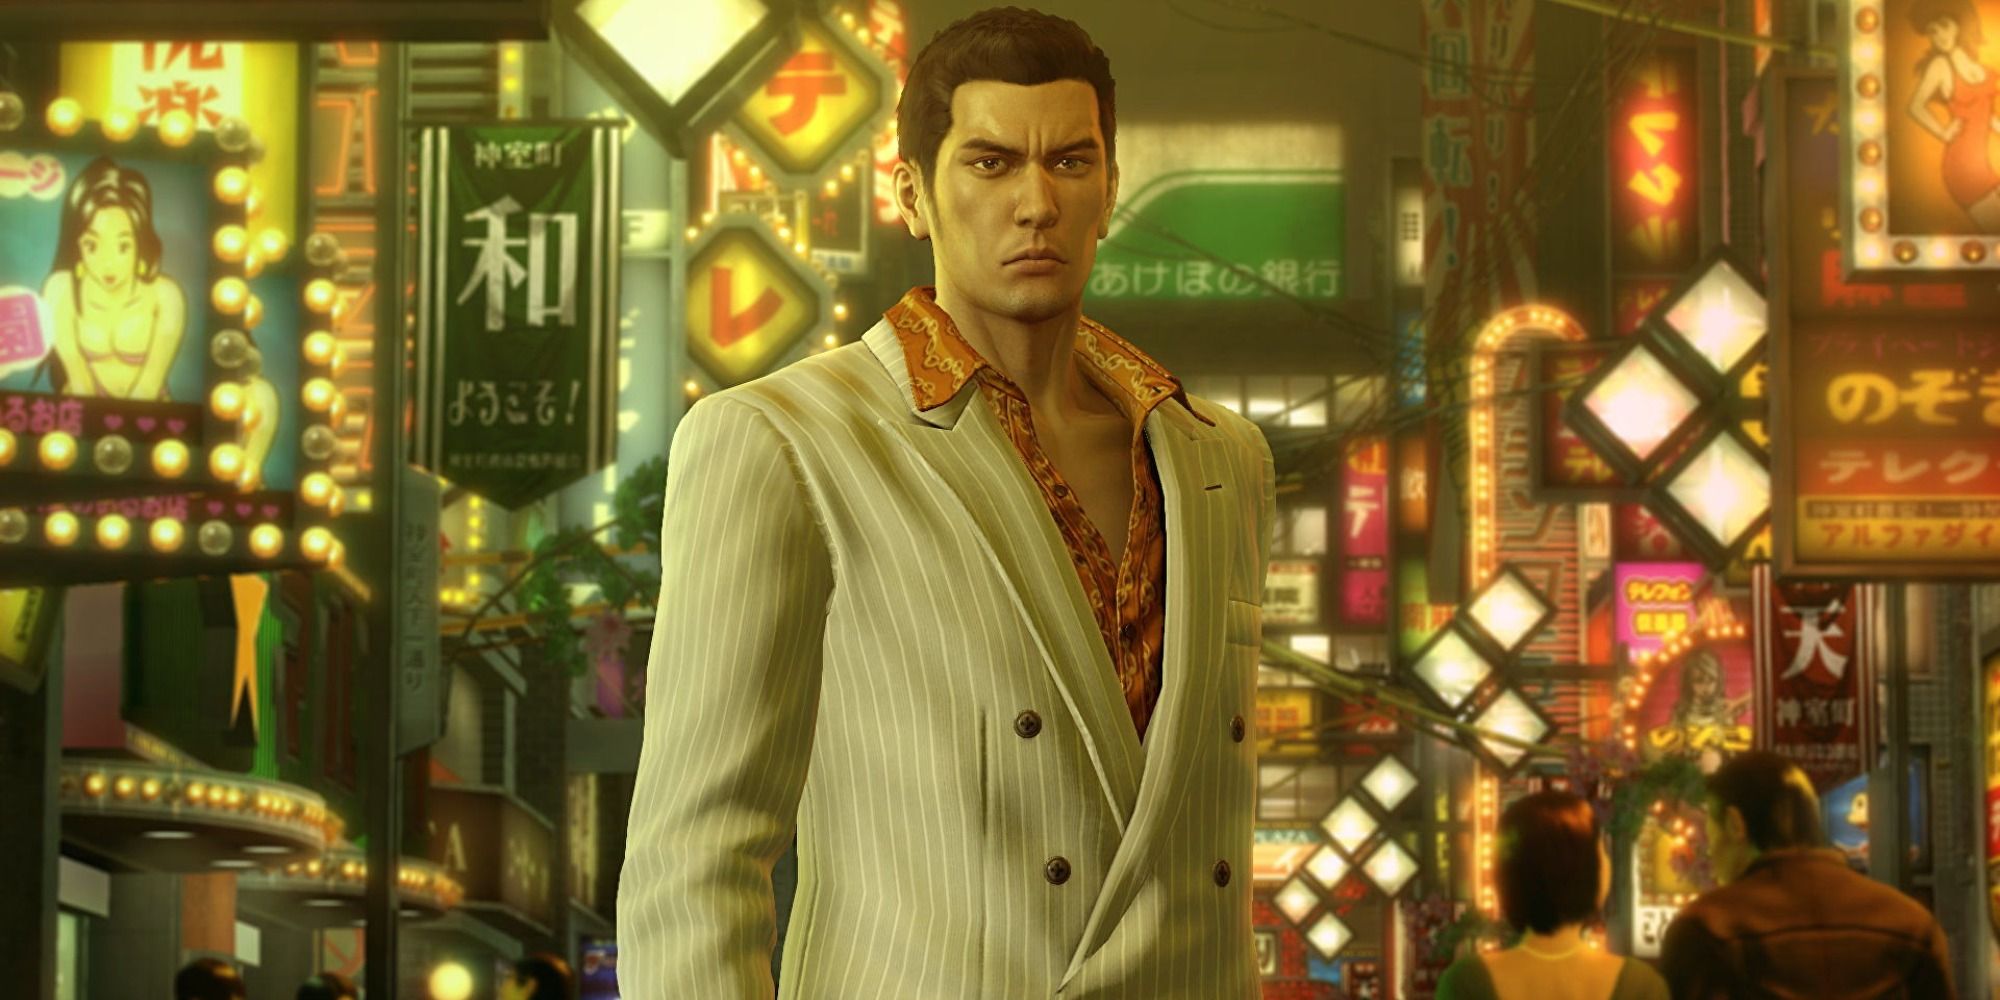 Kiryu standing in the middle of a busy street in Yakuza 0